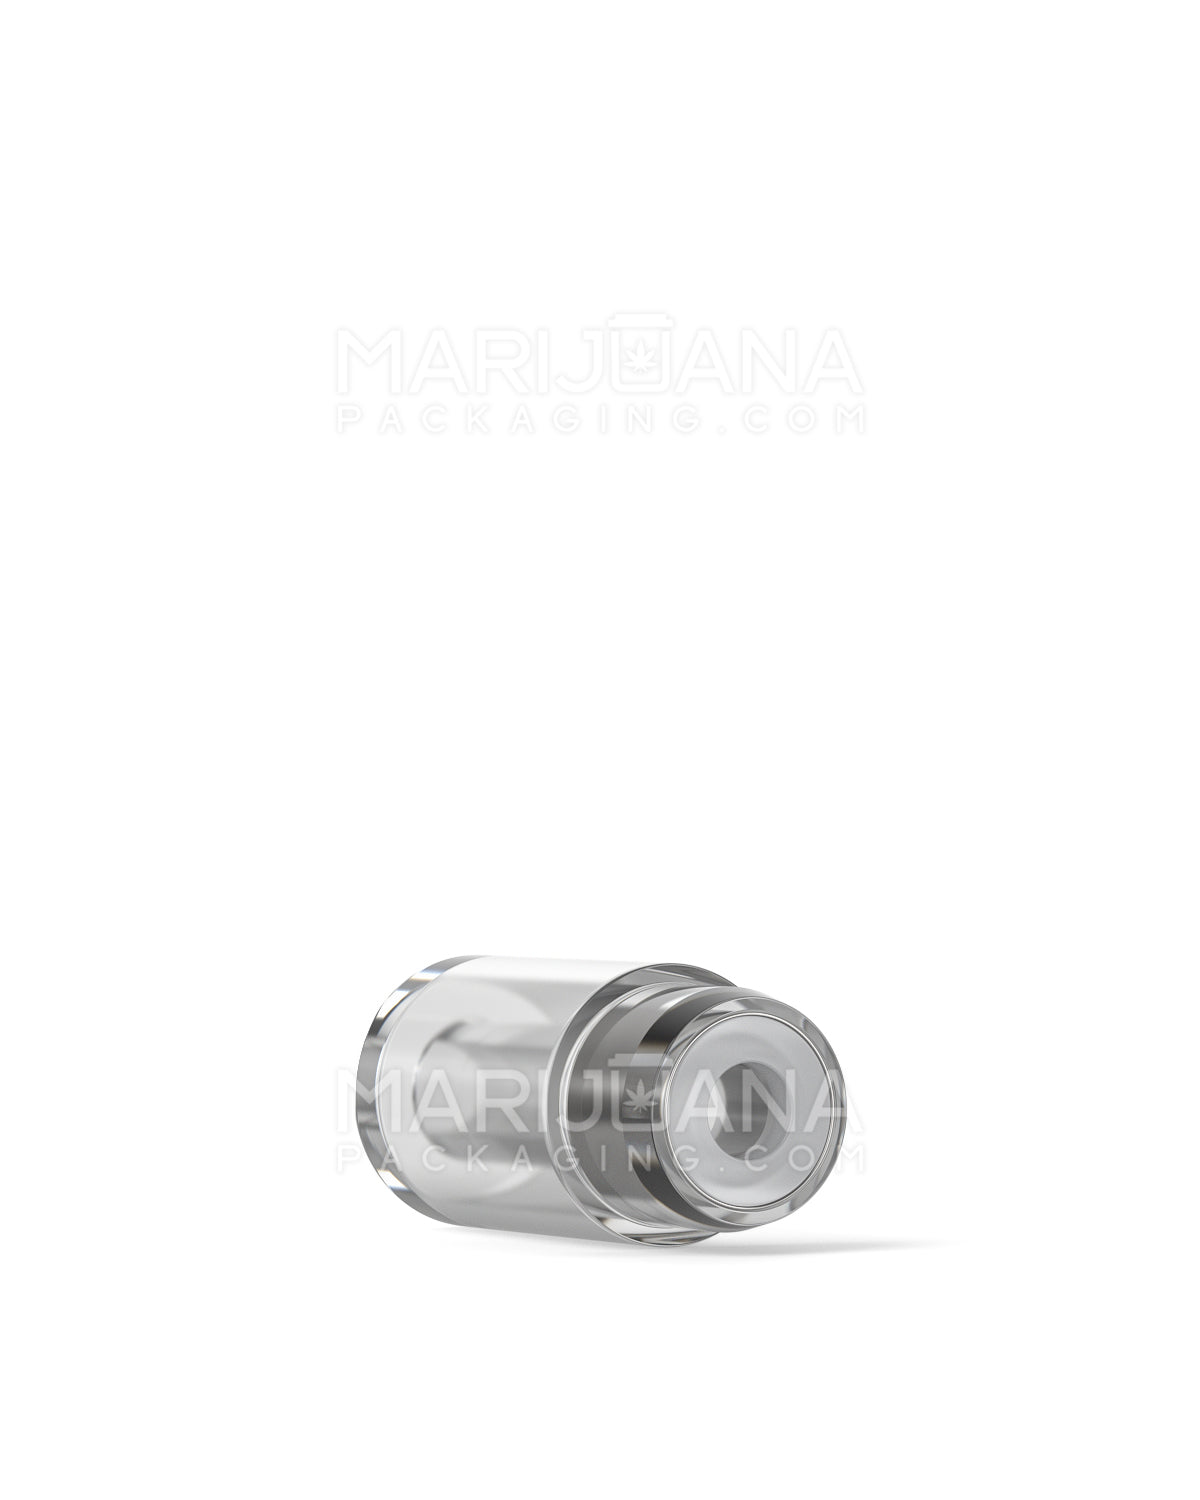 AVD | Barrel Vape Mouthpiece for GoodCarts Plastic Cartridges | Clear Plastic - Press On - 600 Count - 6